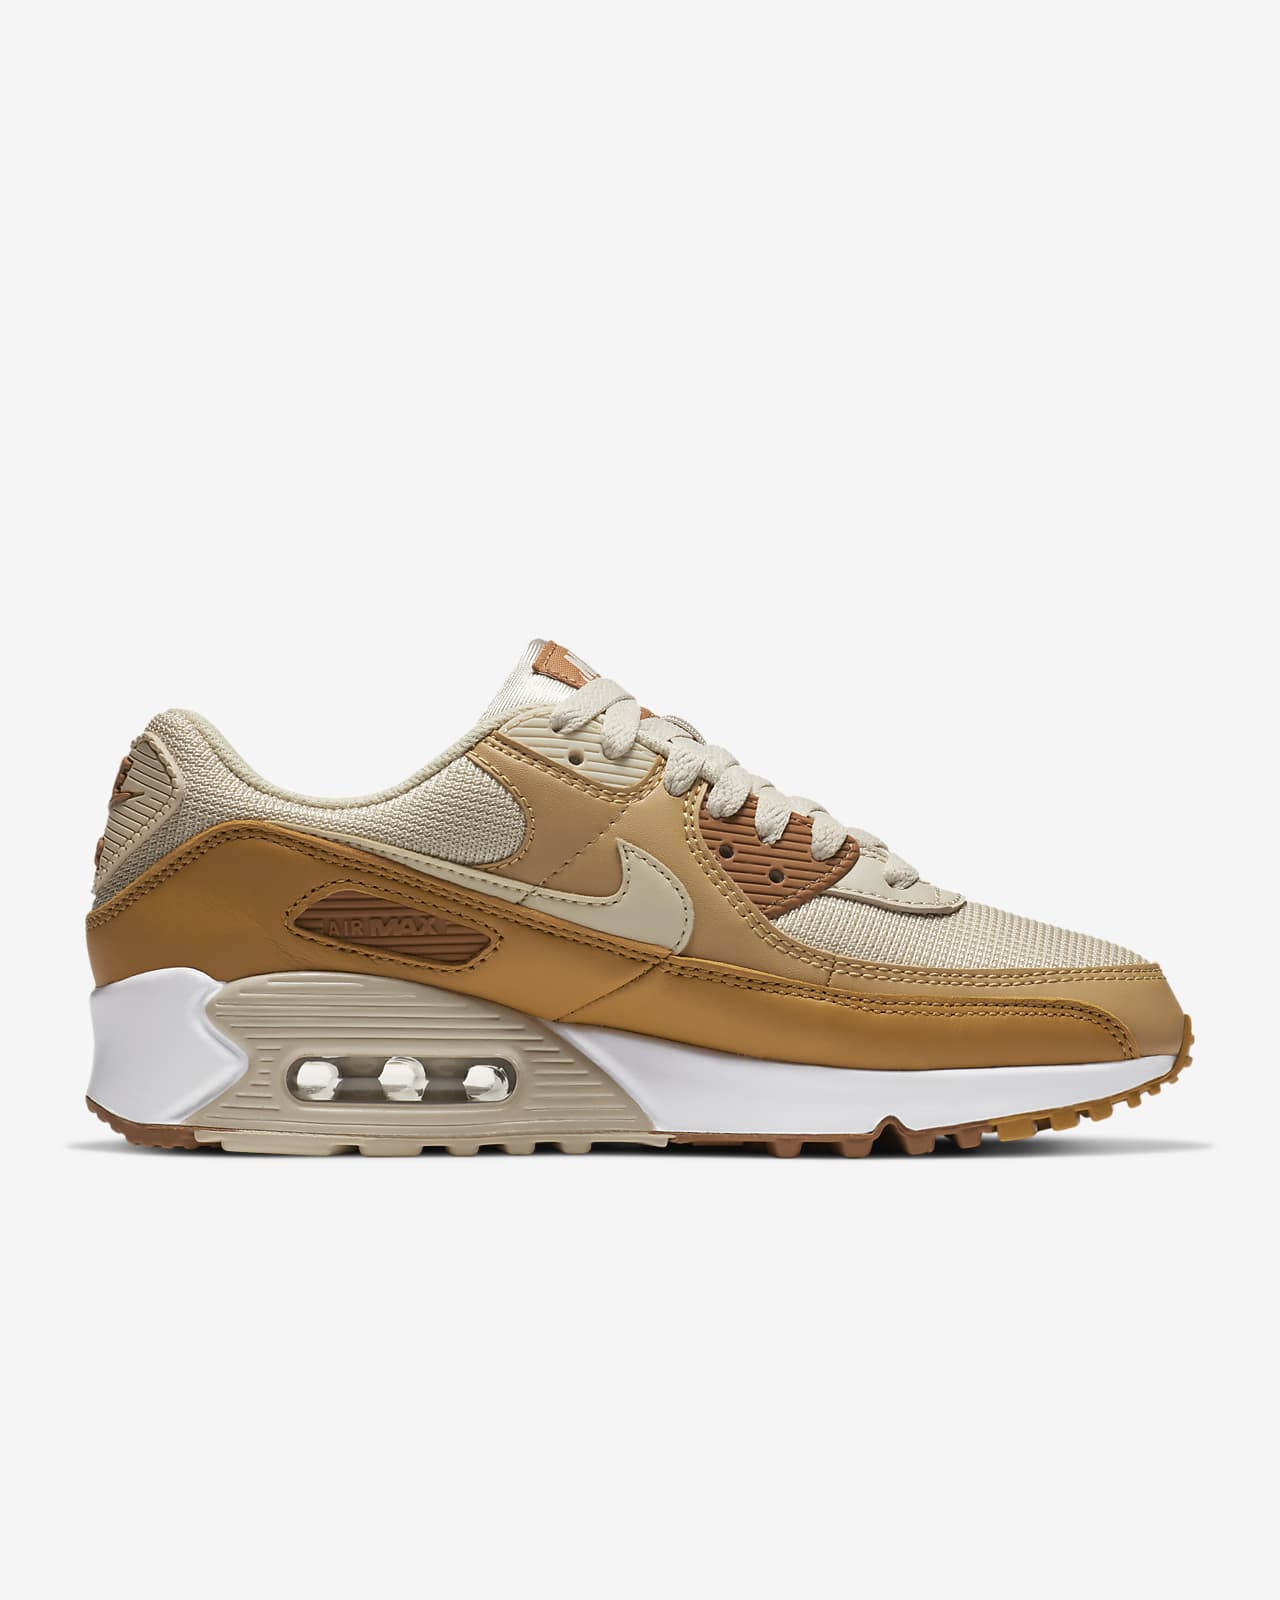 size 8 women's nike air max 90 shoes